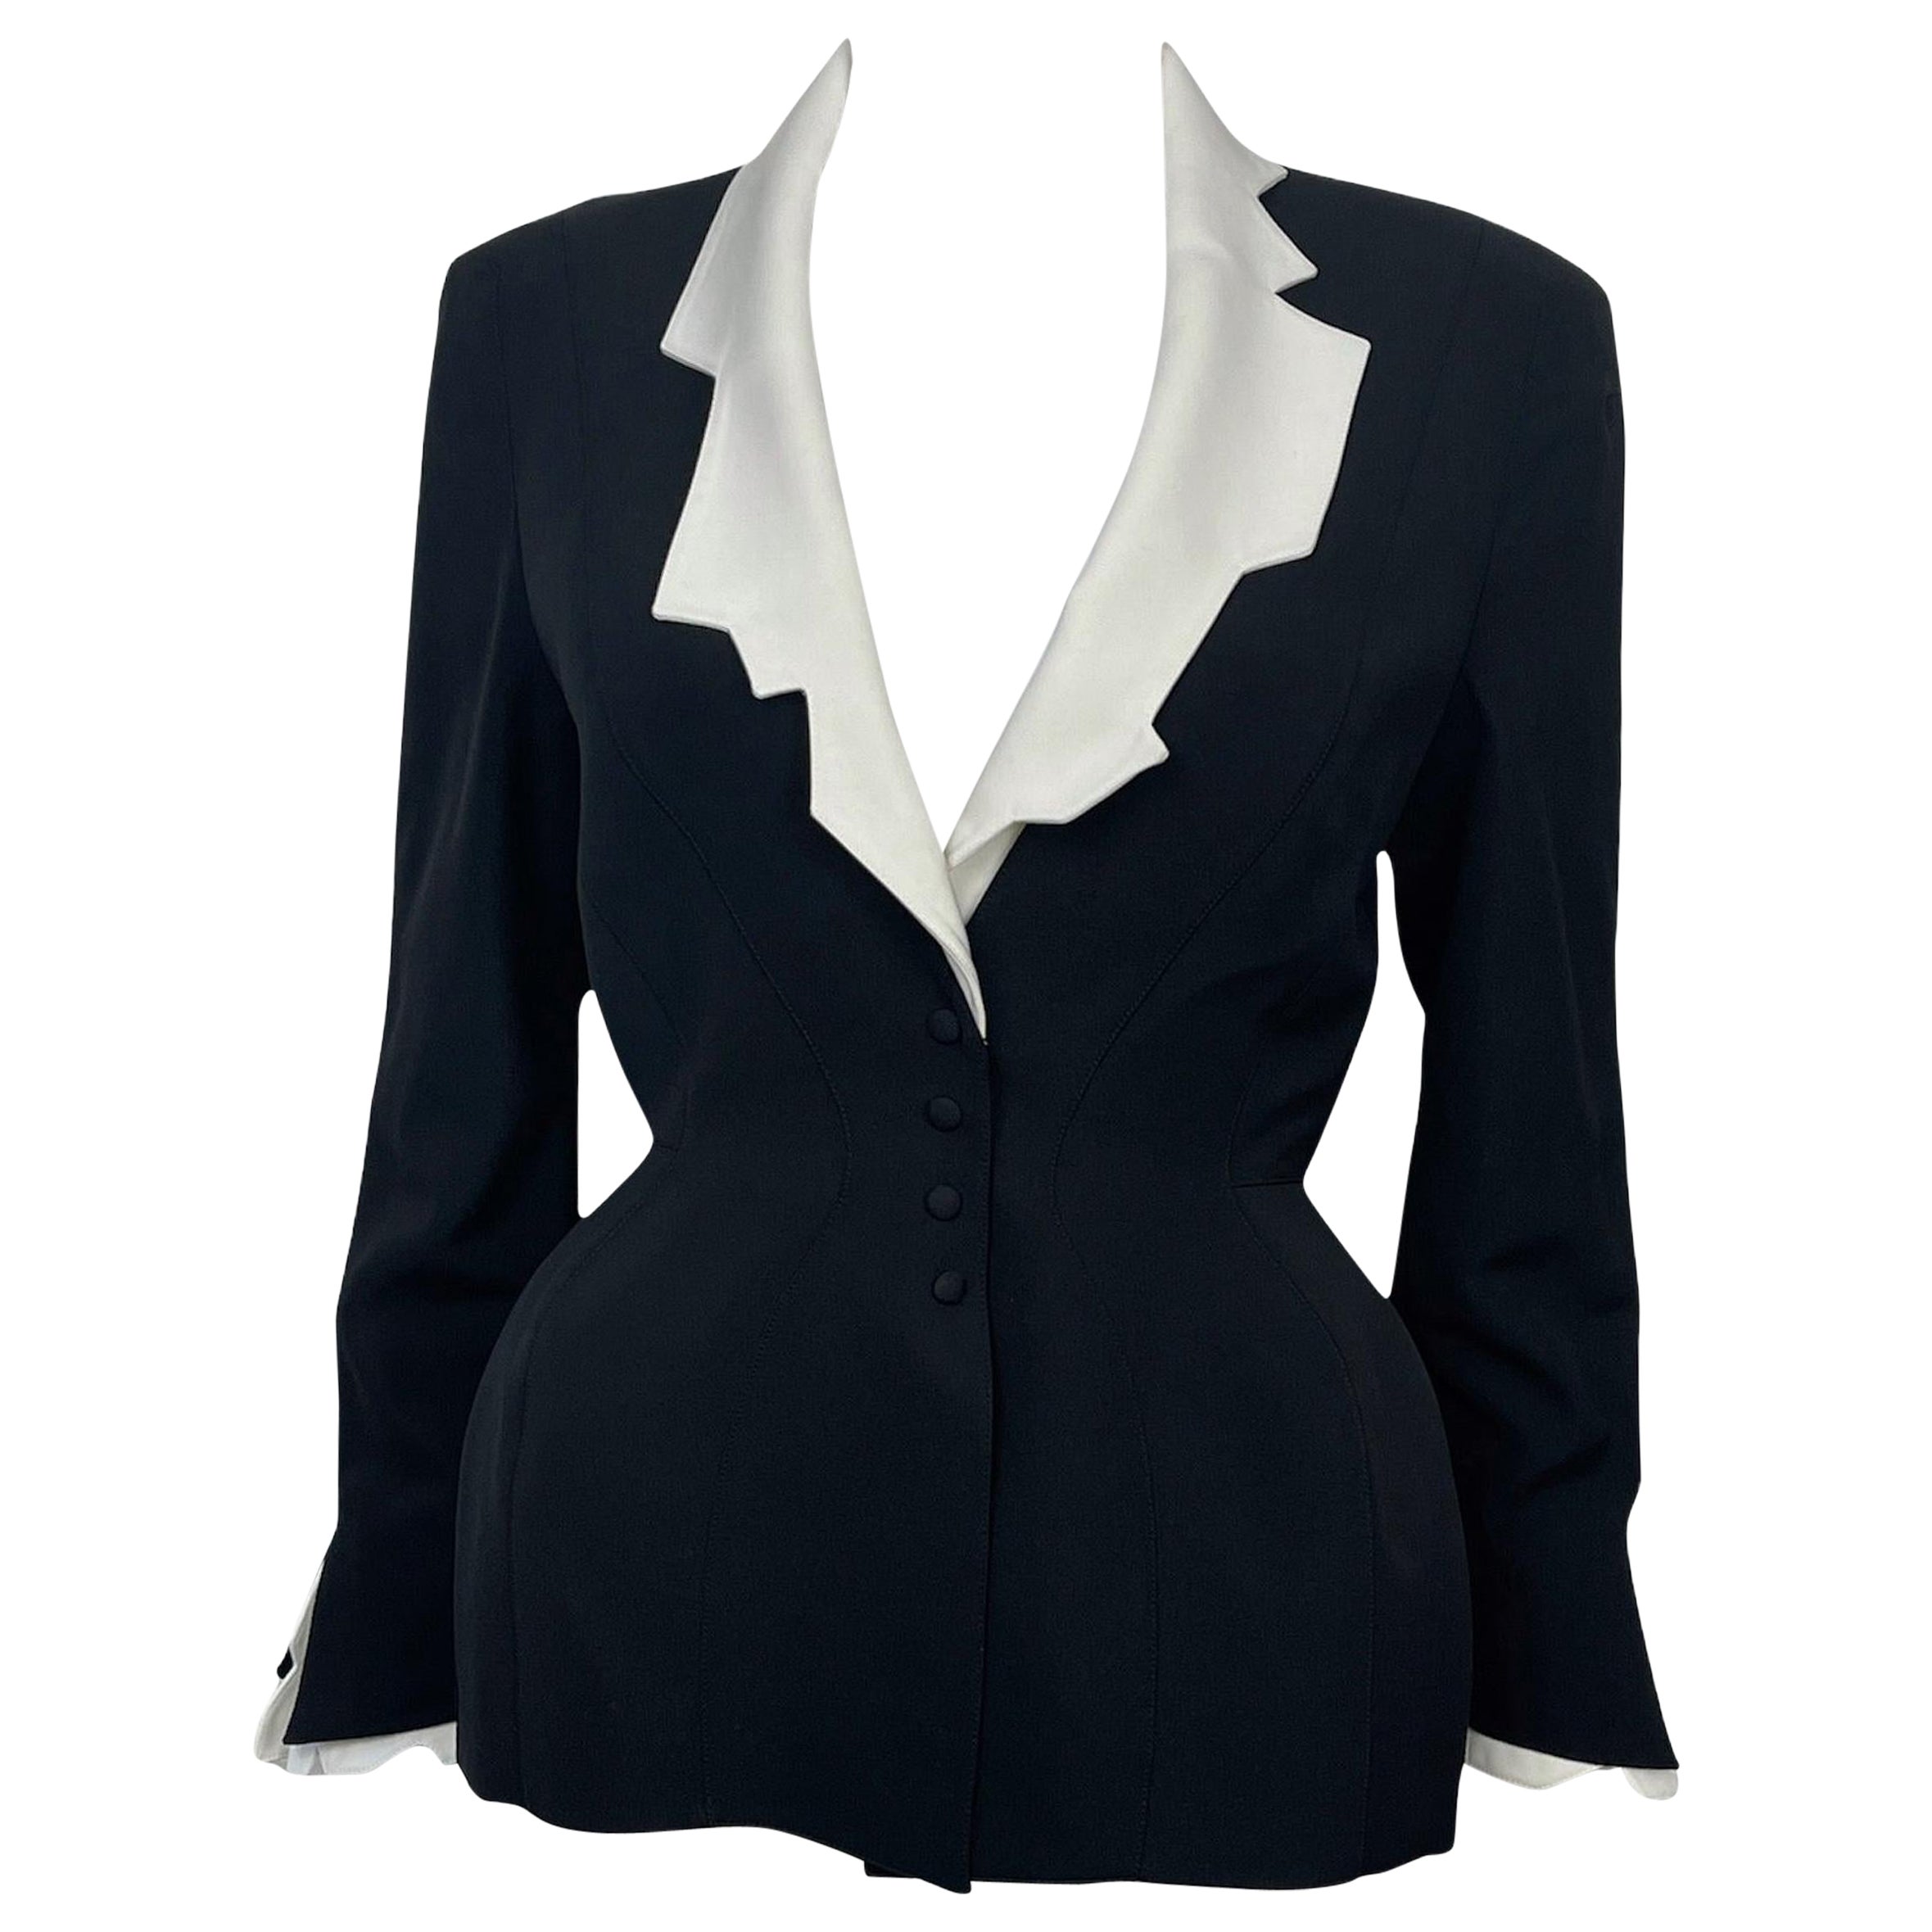 1994 Iconic Thierry Mugler Jacket in Black and White Worsted Wool at  1stDibs | thierry mugler blazer, blazer thierry mugler, mugler jackets